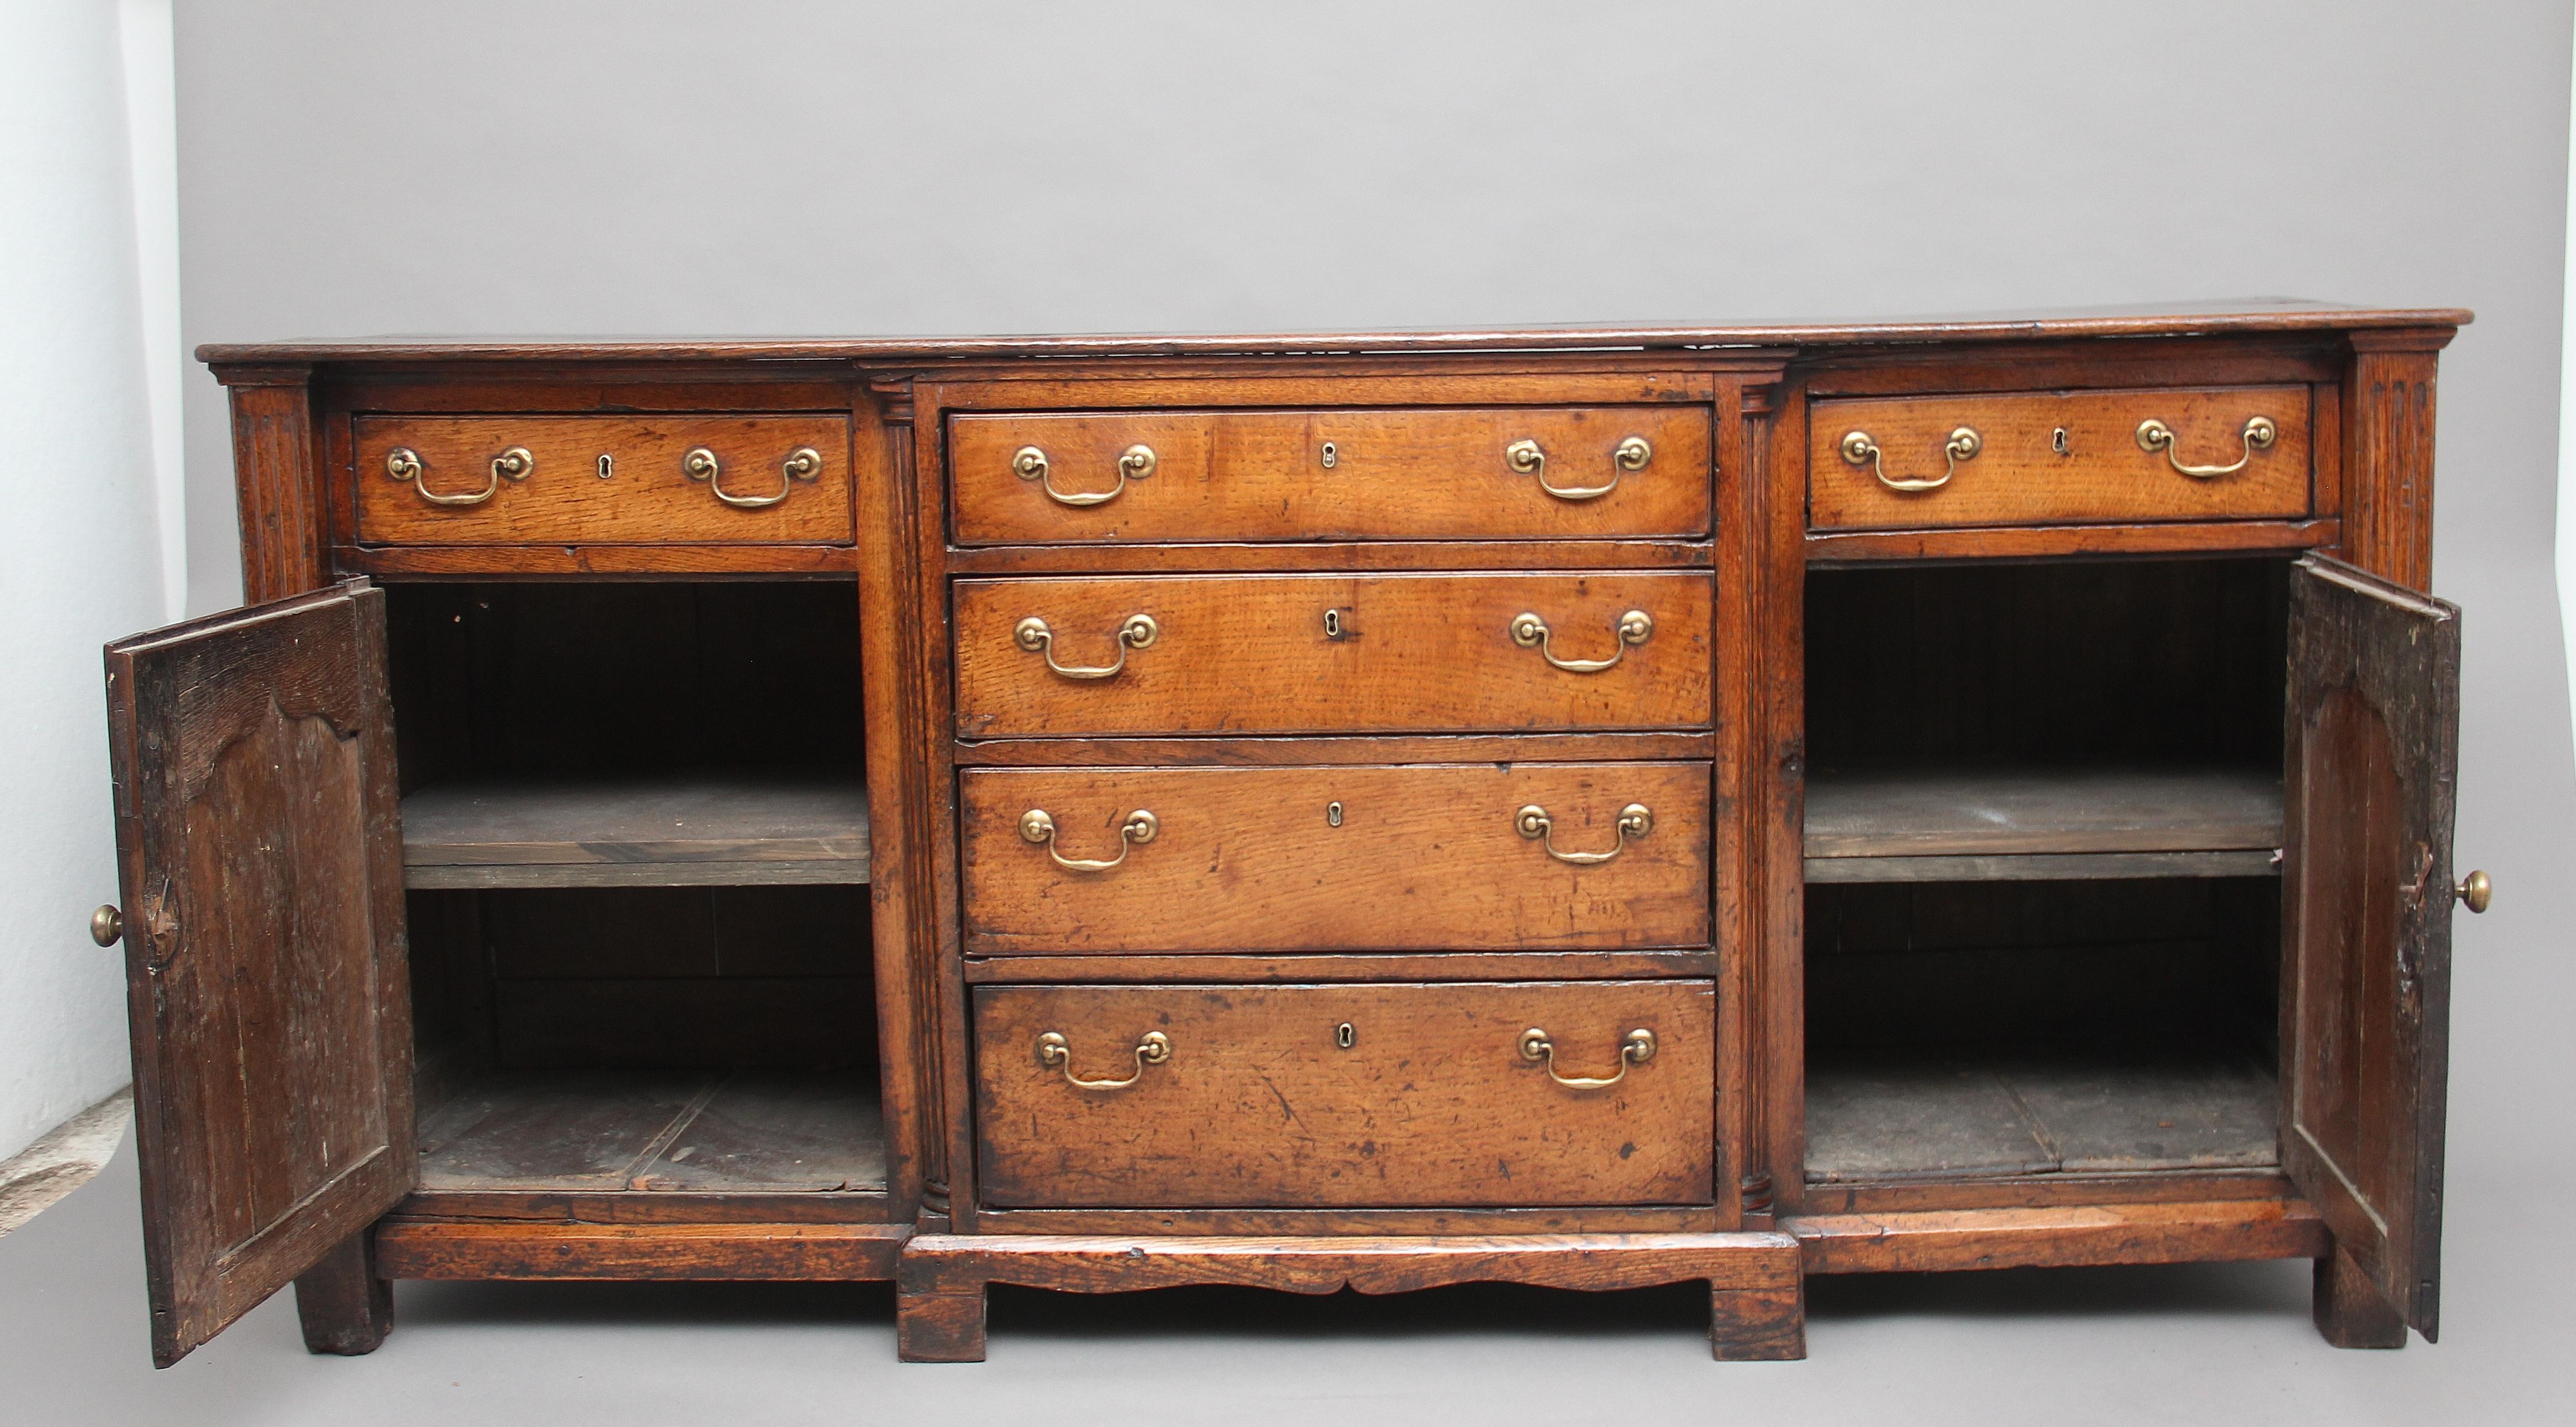 Mid-18th century oak dresser, the rectangular top above a selection of six oak lined drawers, all with original brass swan neck handles, cupboard doors either side with fielded panels, opening to reveal a single shelf inside, fluted columns at each